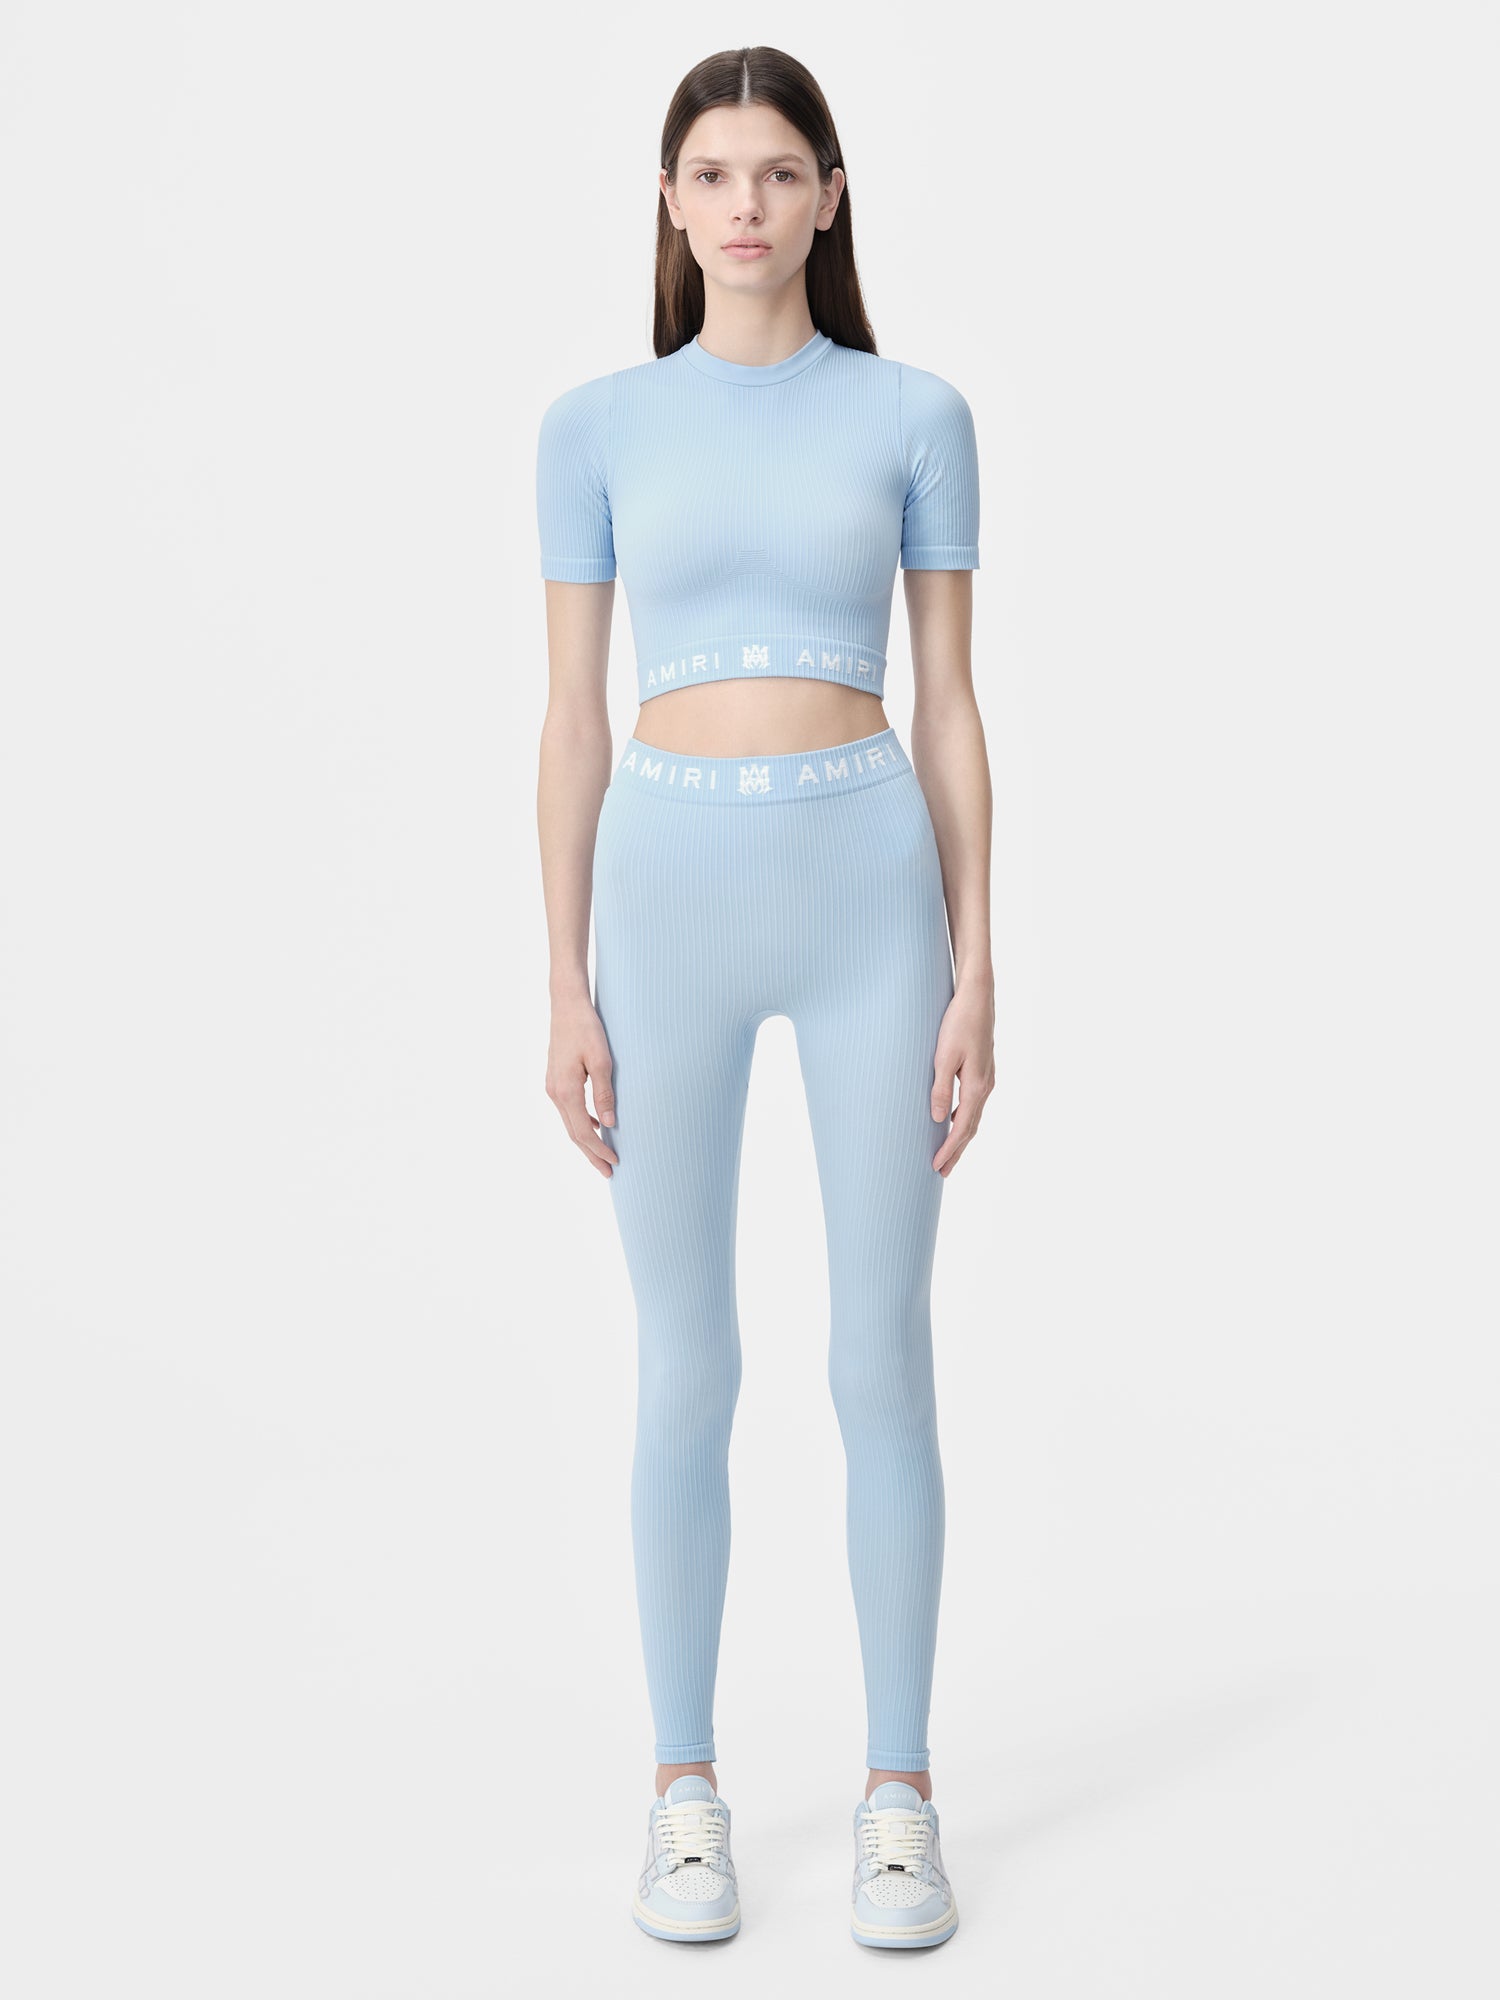 Product WOMEN - WOMEN'S MA RIBBED SEAMLESS S/S TOP - Cerulean featured image